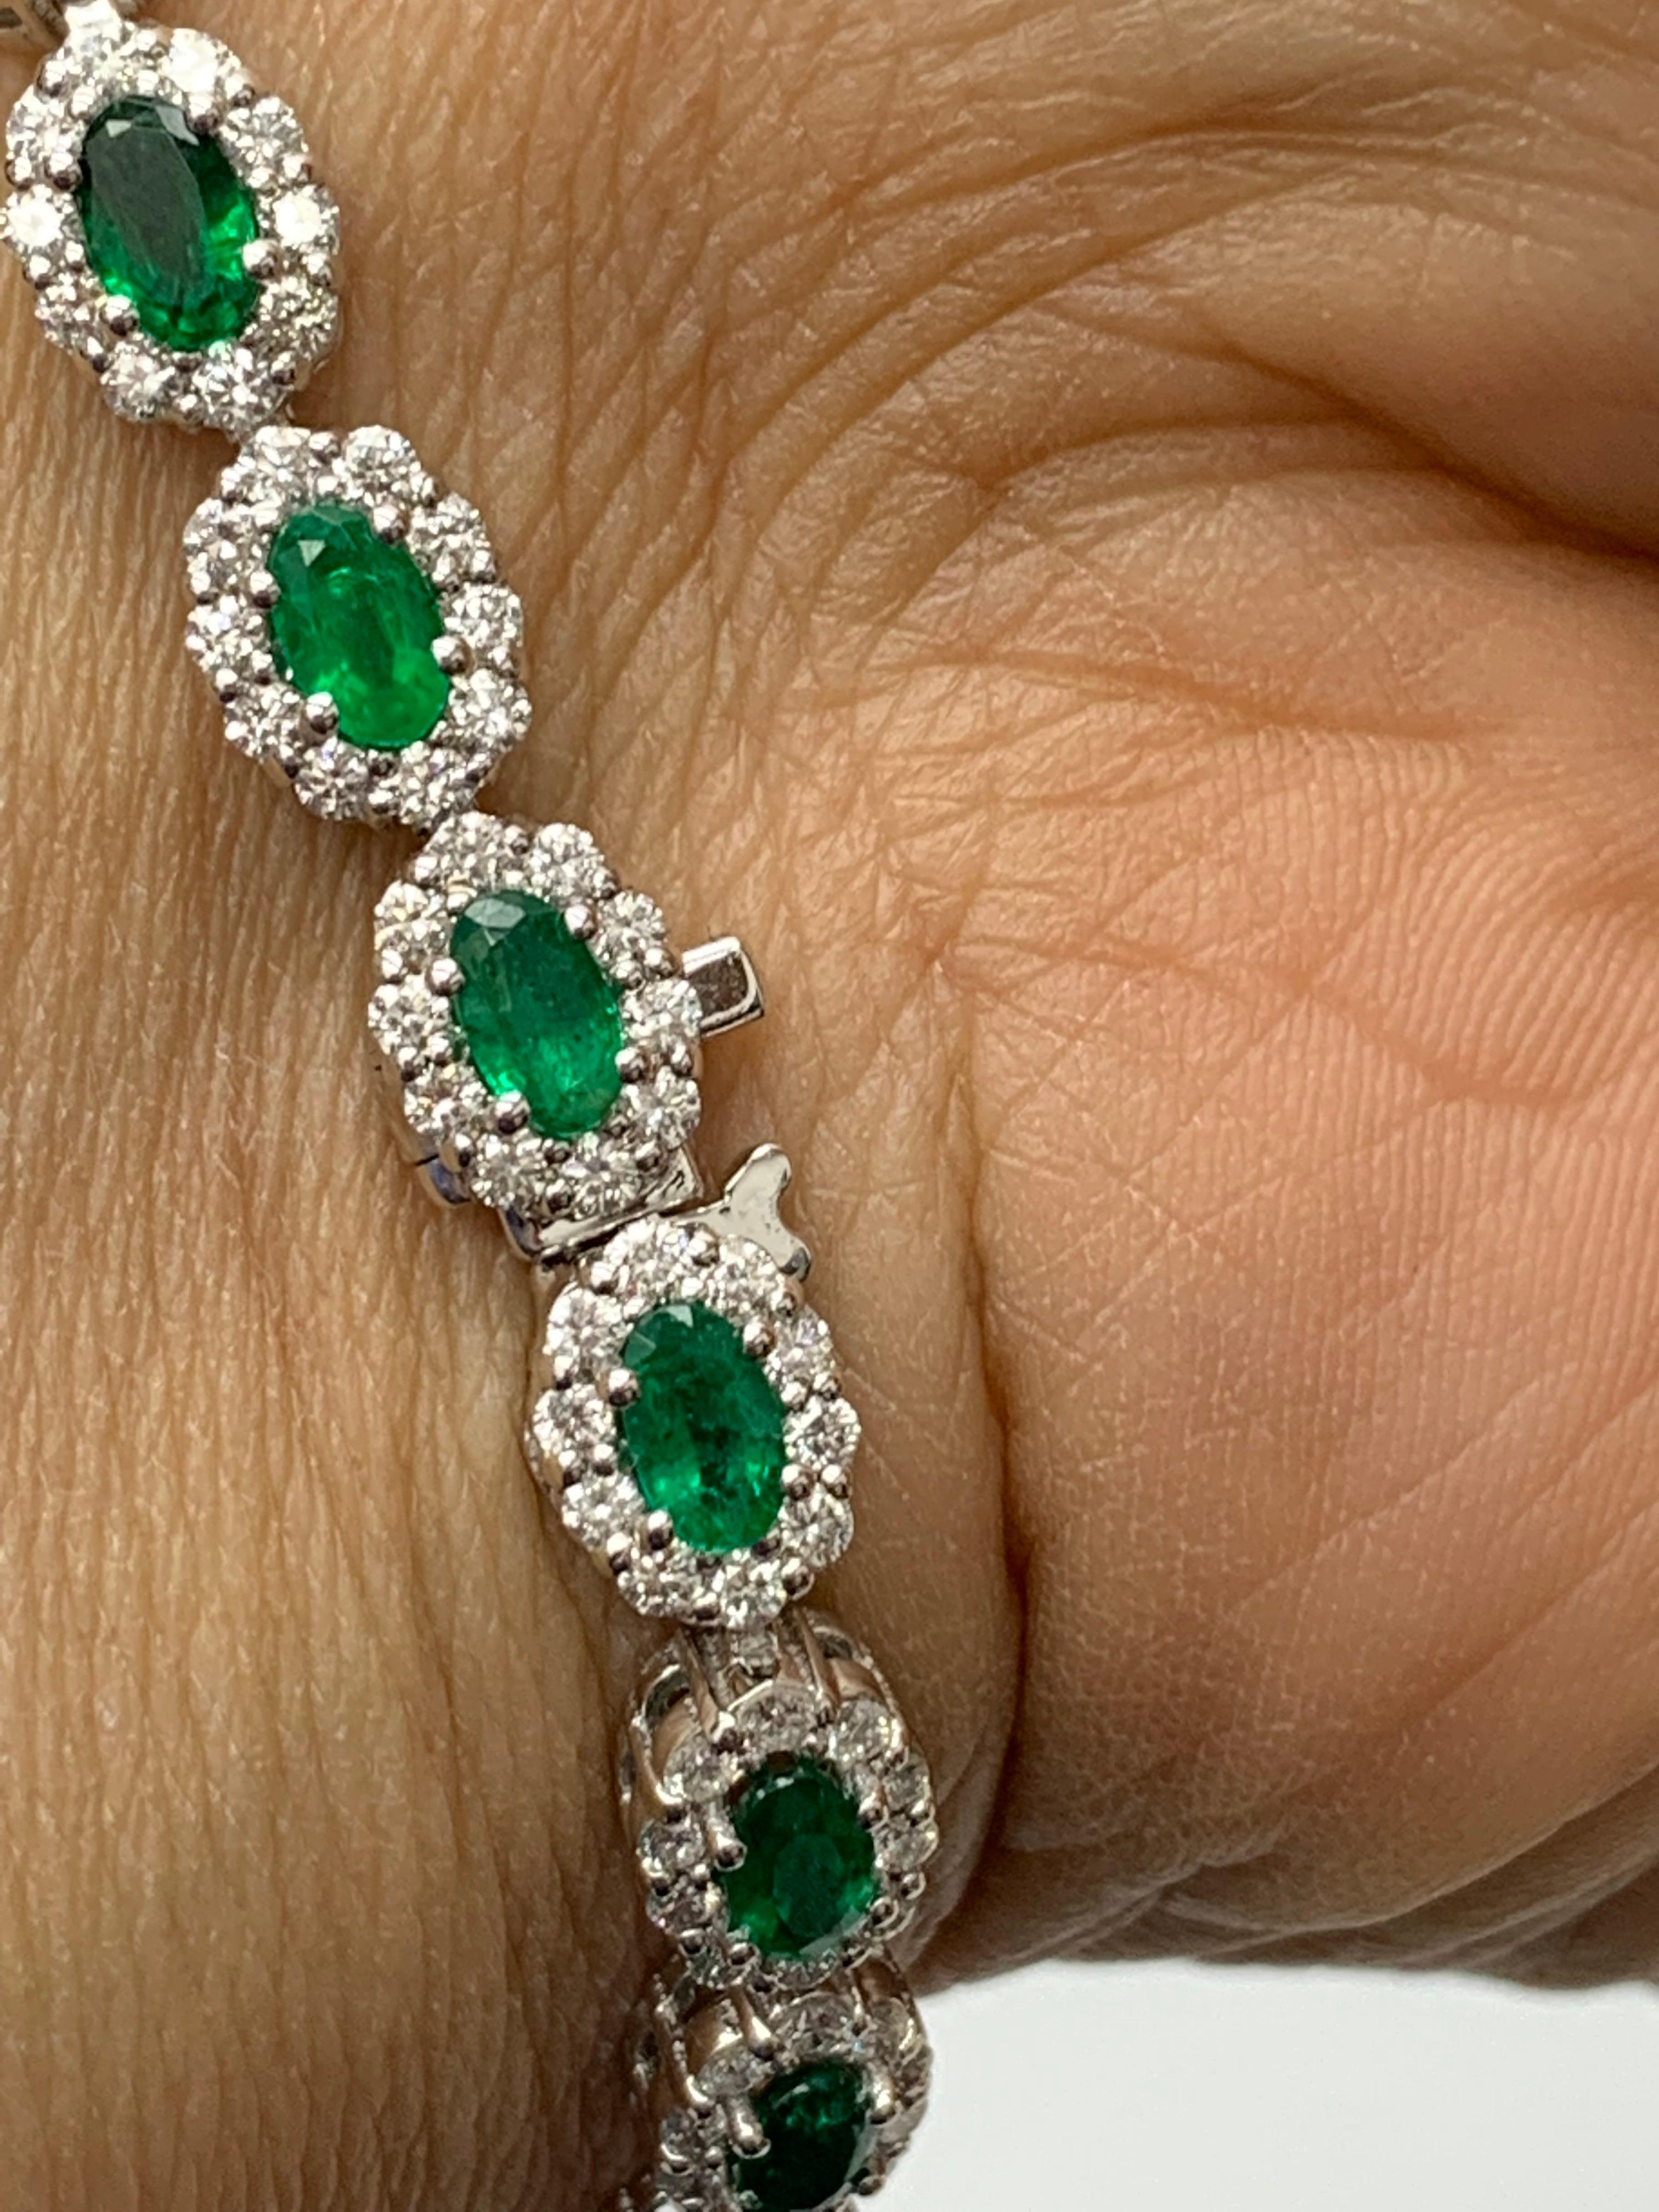 4.69 Carat Oval Cut Emerald and Diamond Halo Bracelet in 14K White Gold For Sale 1